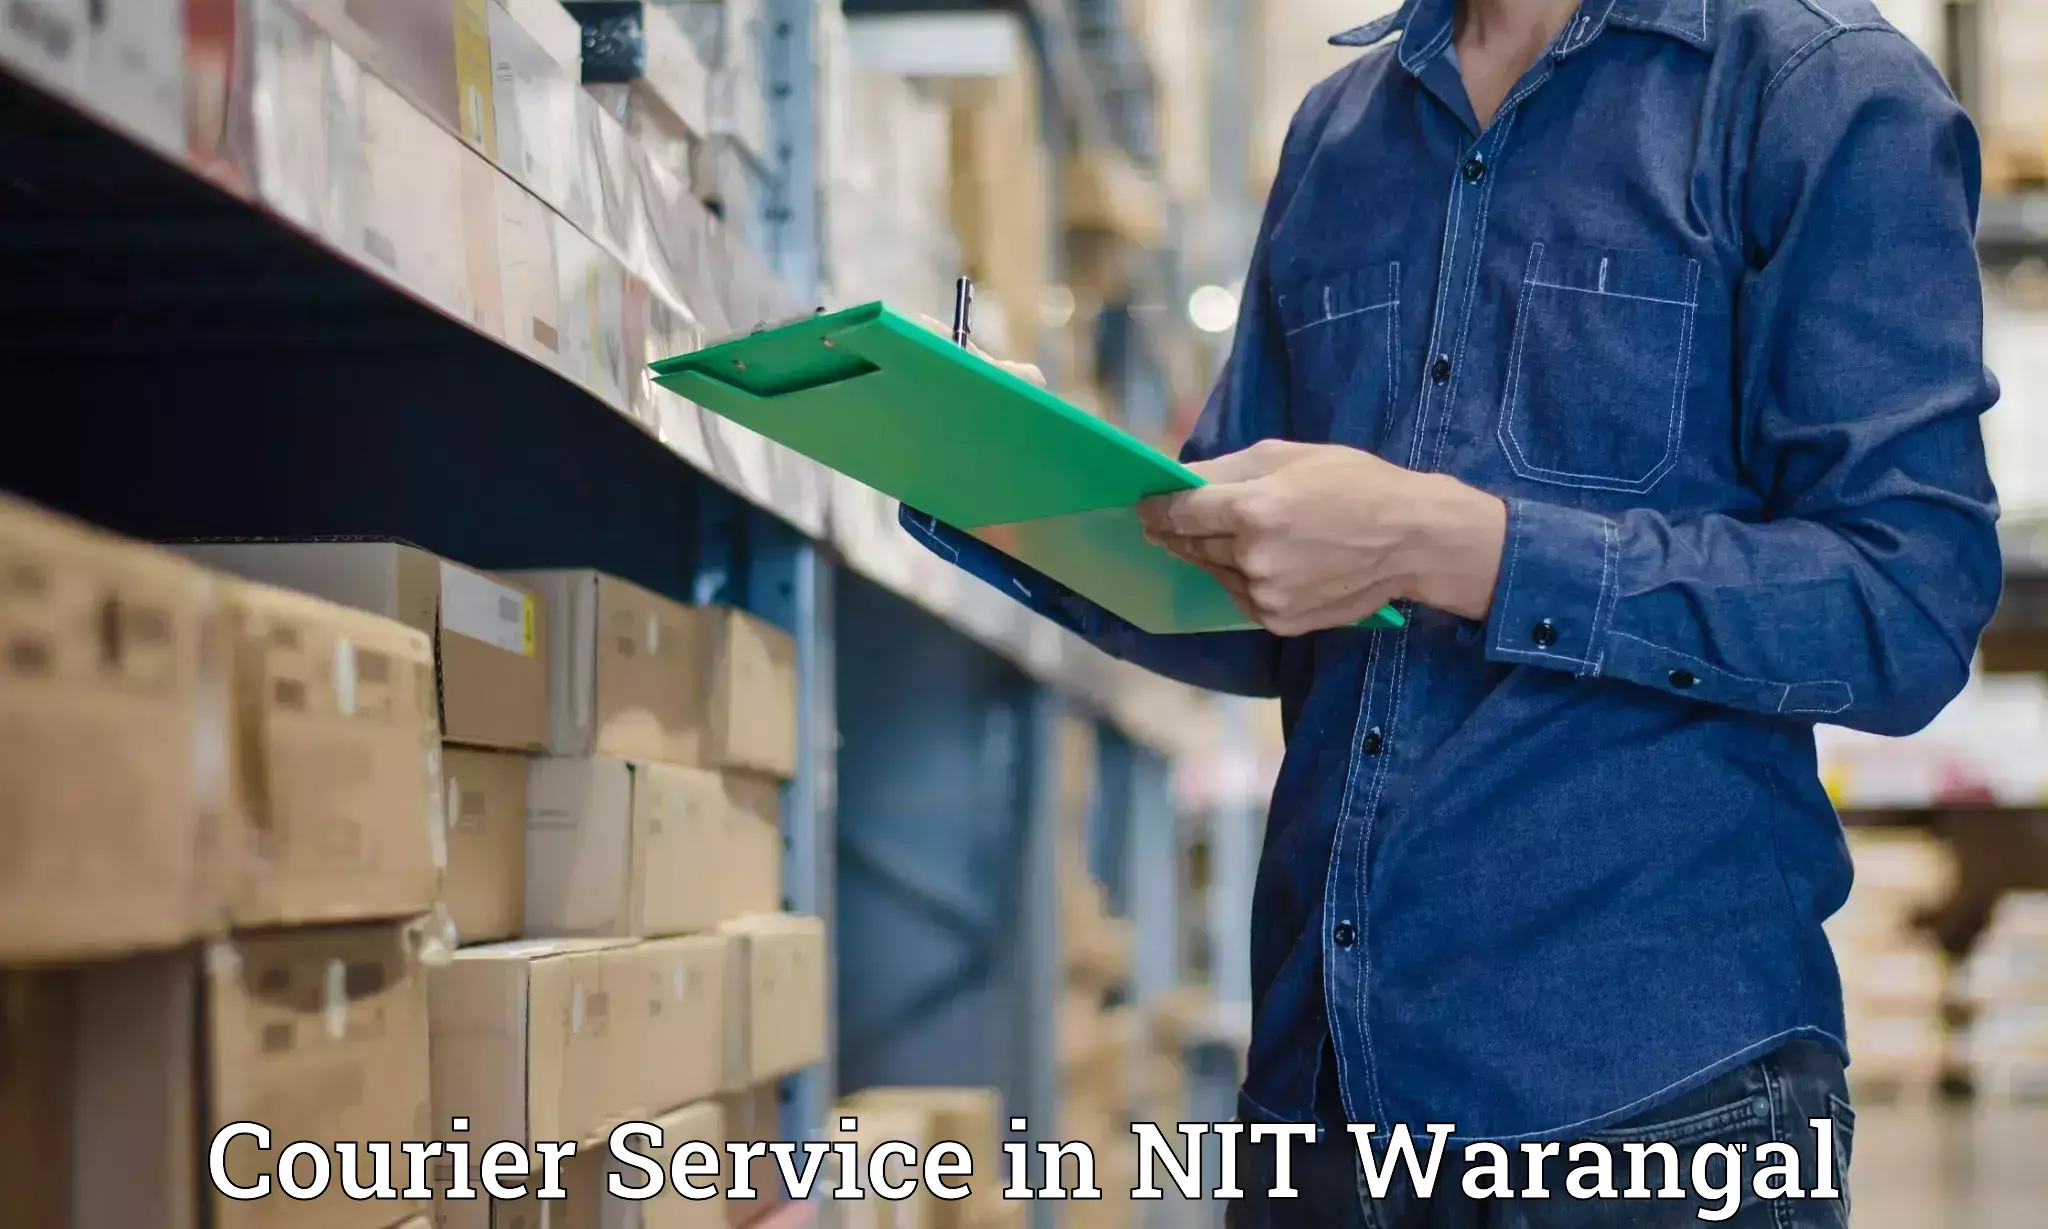 Integrated shipping systems in NIT Warangal